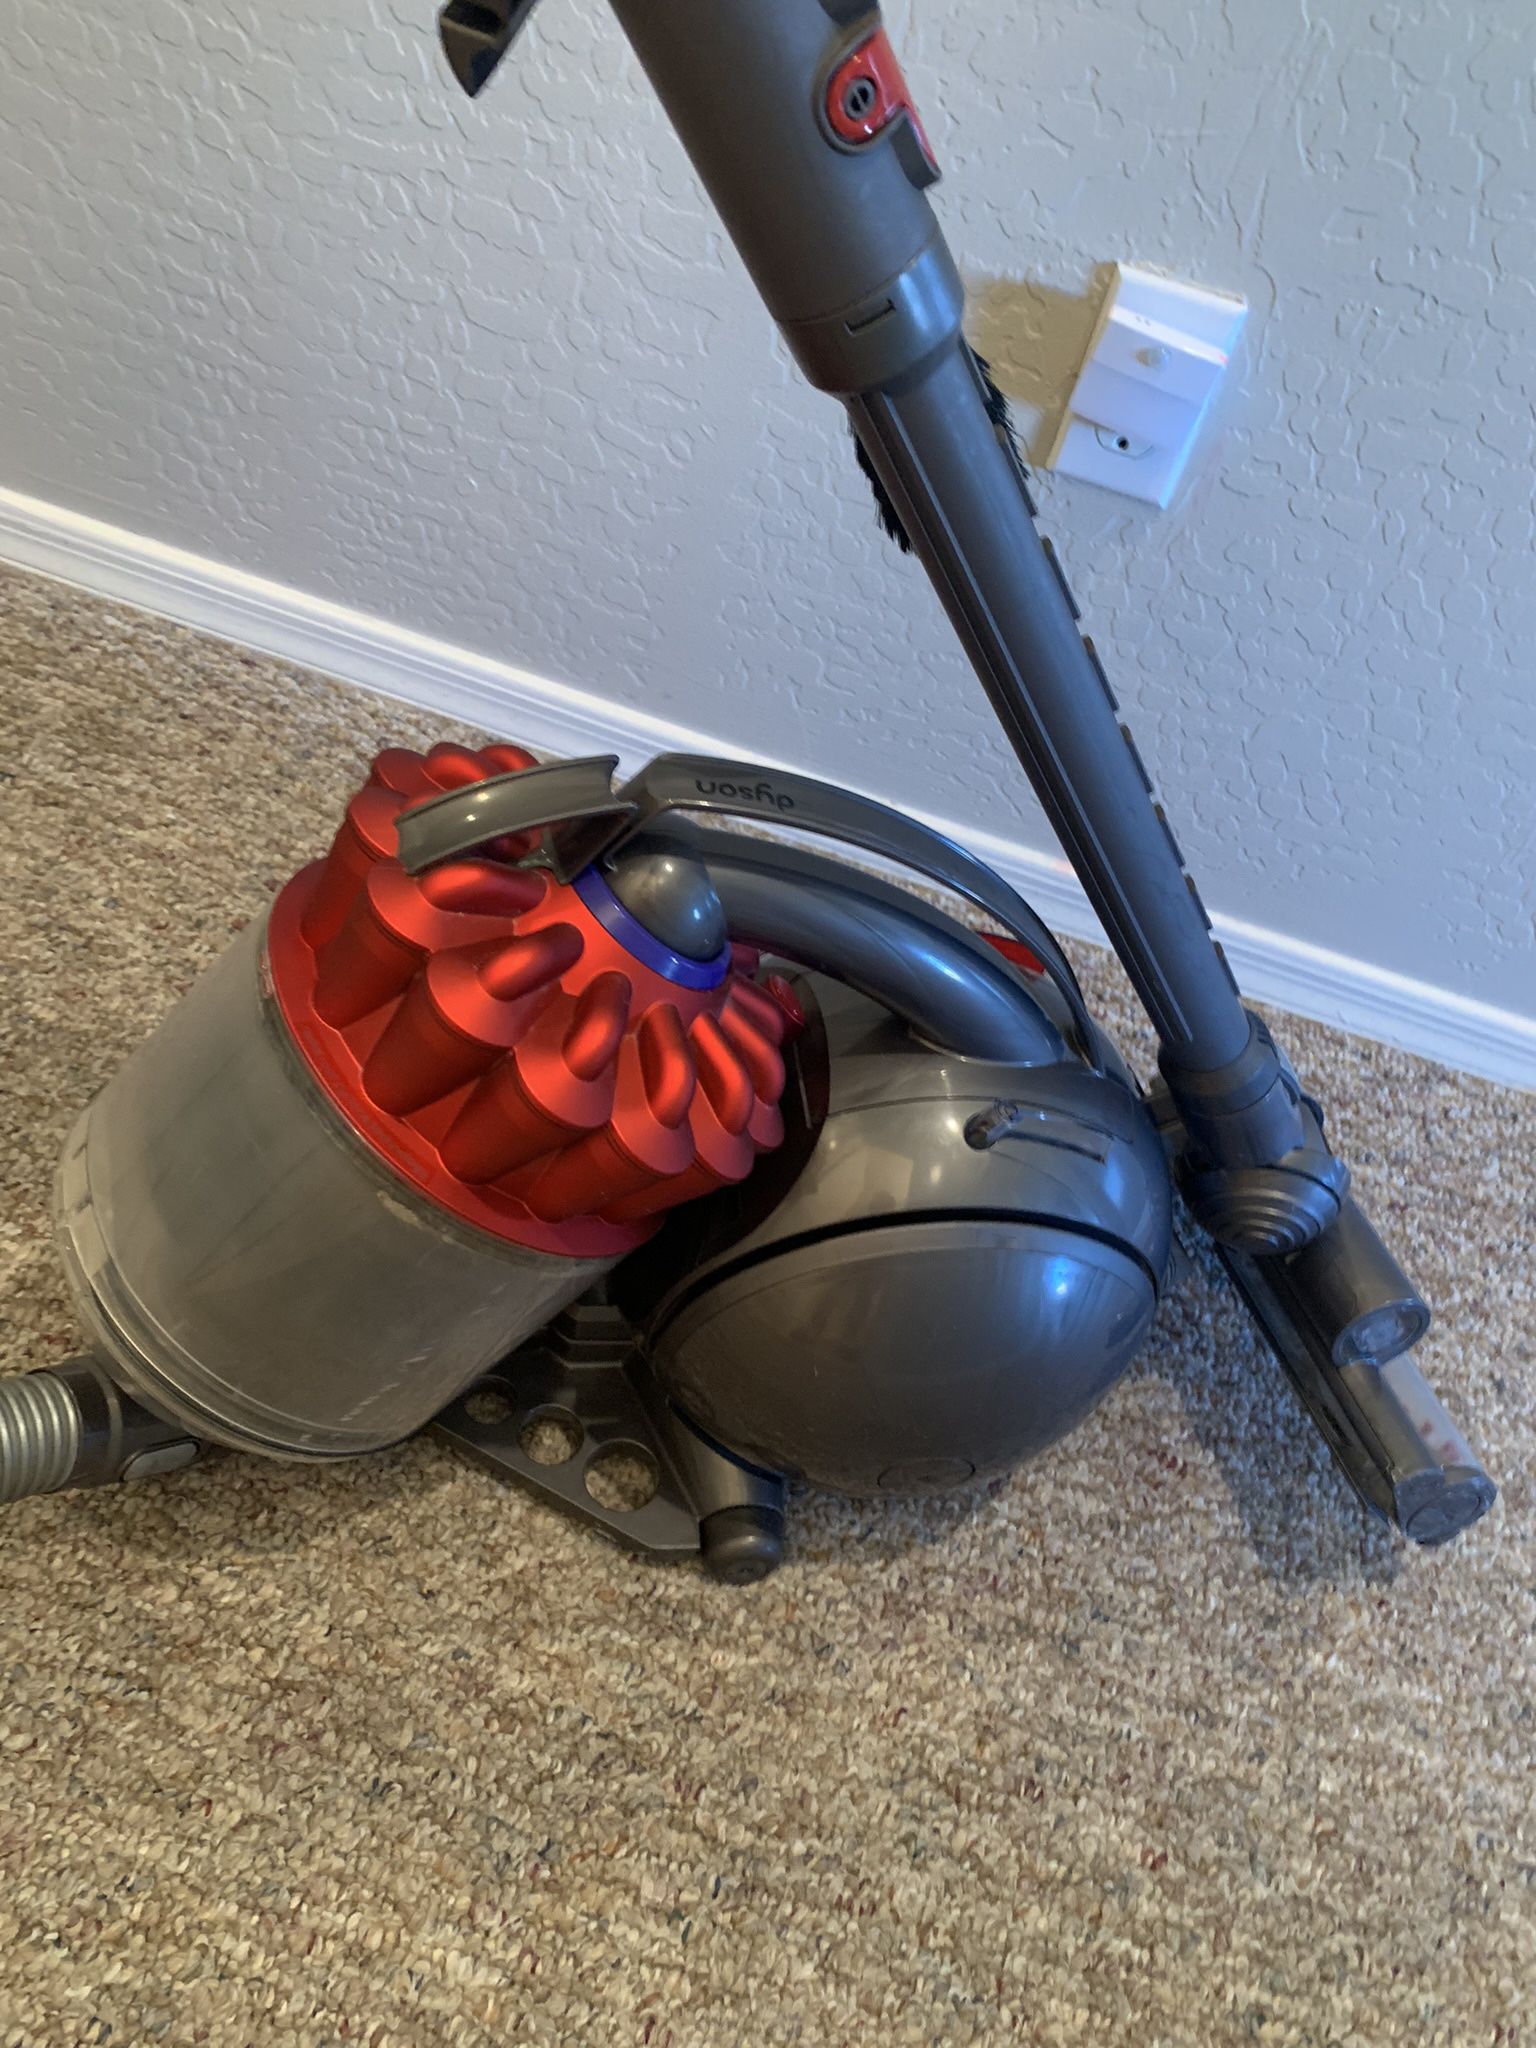 Dyson Cyclone Canister Vacuum With All Attachments